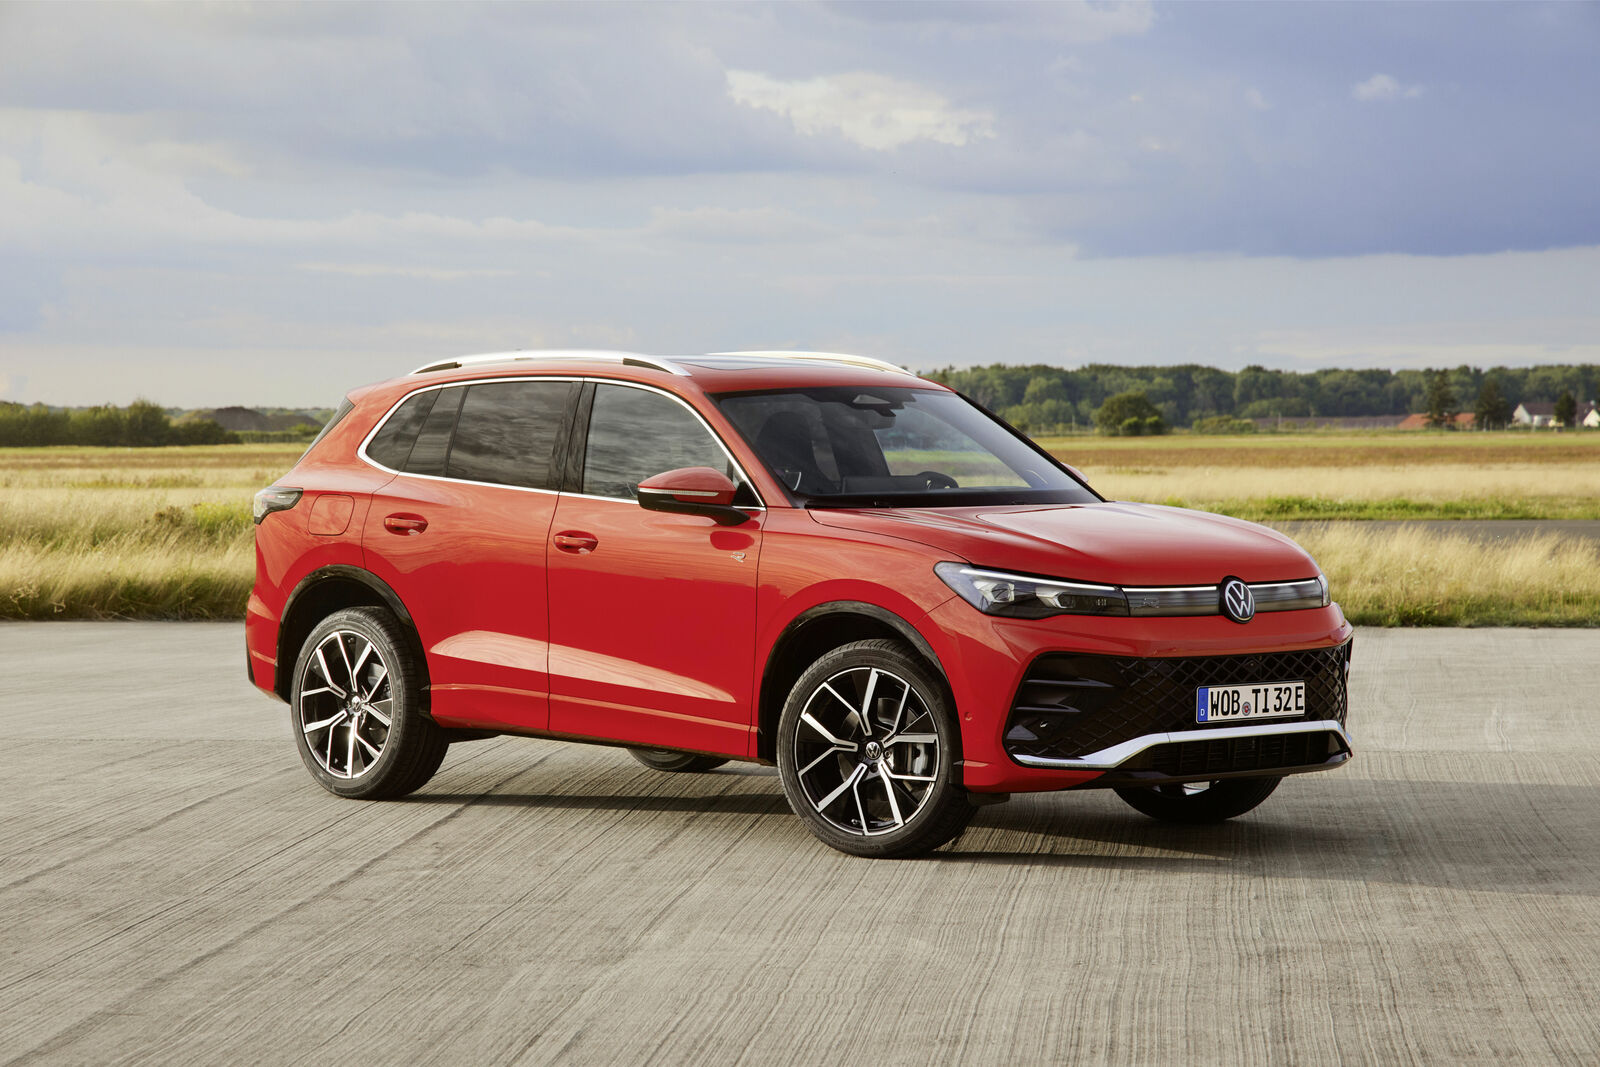 The all-new Tiguan is now available to order in Europe